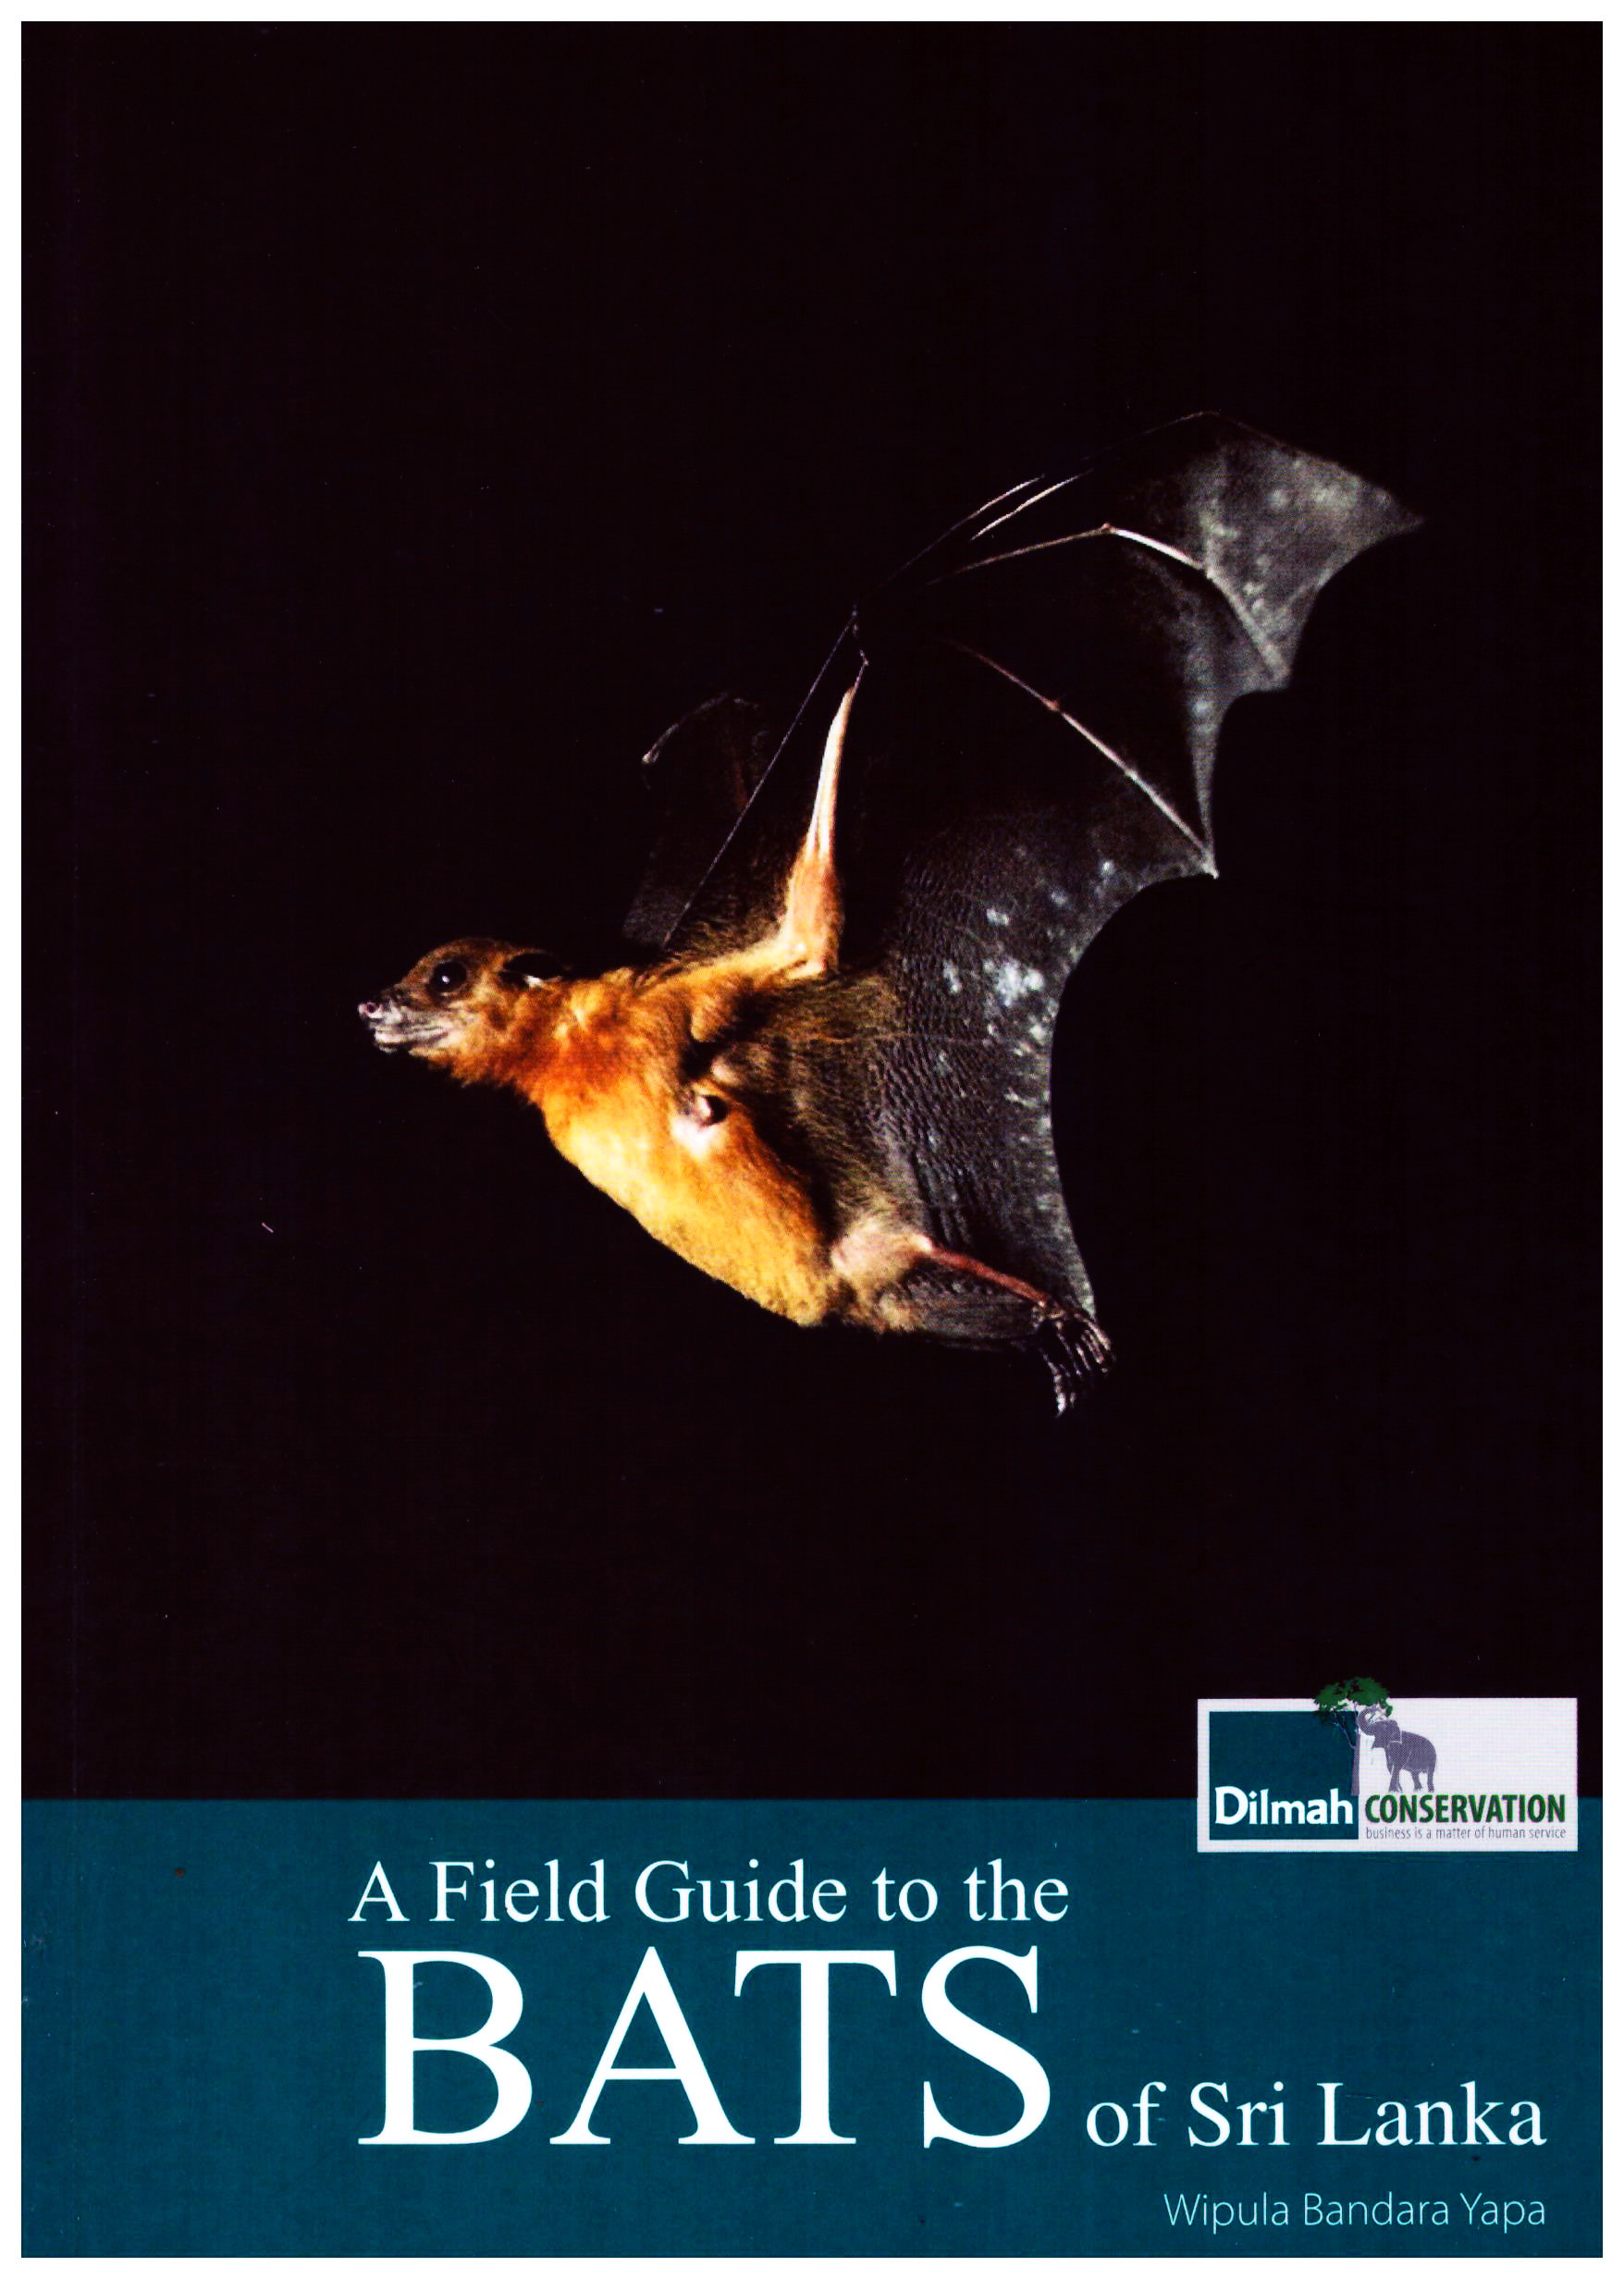 A Field Guide to the Bats of Sri Lanka